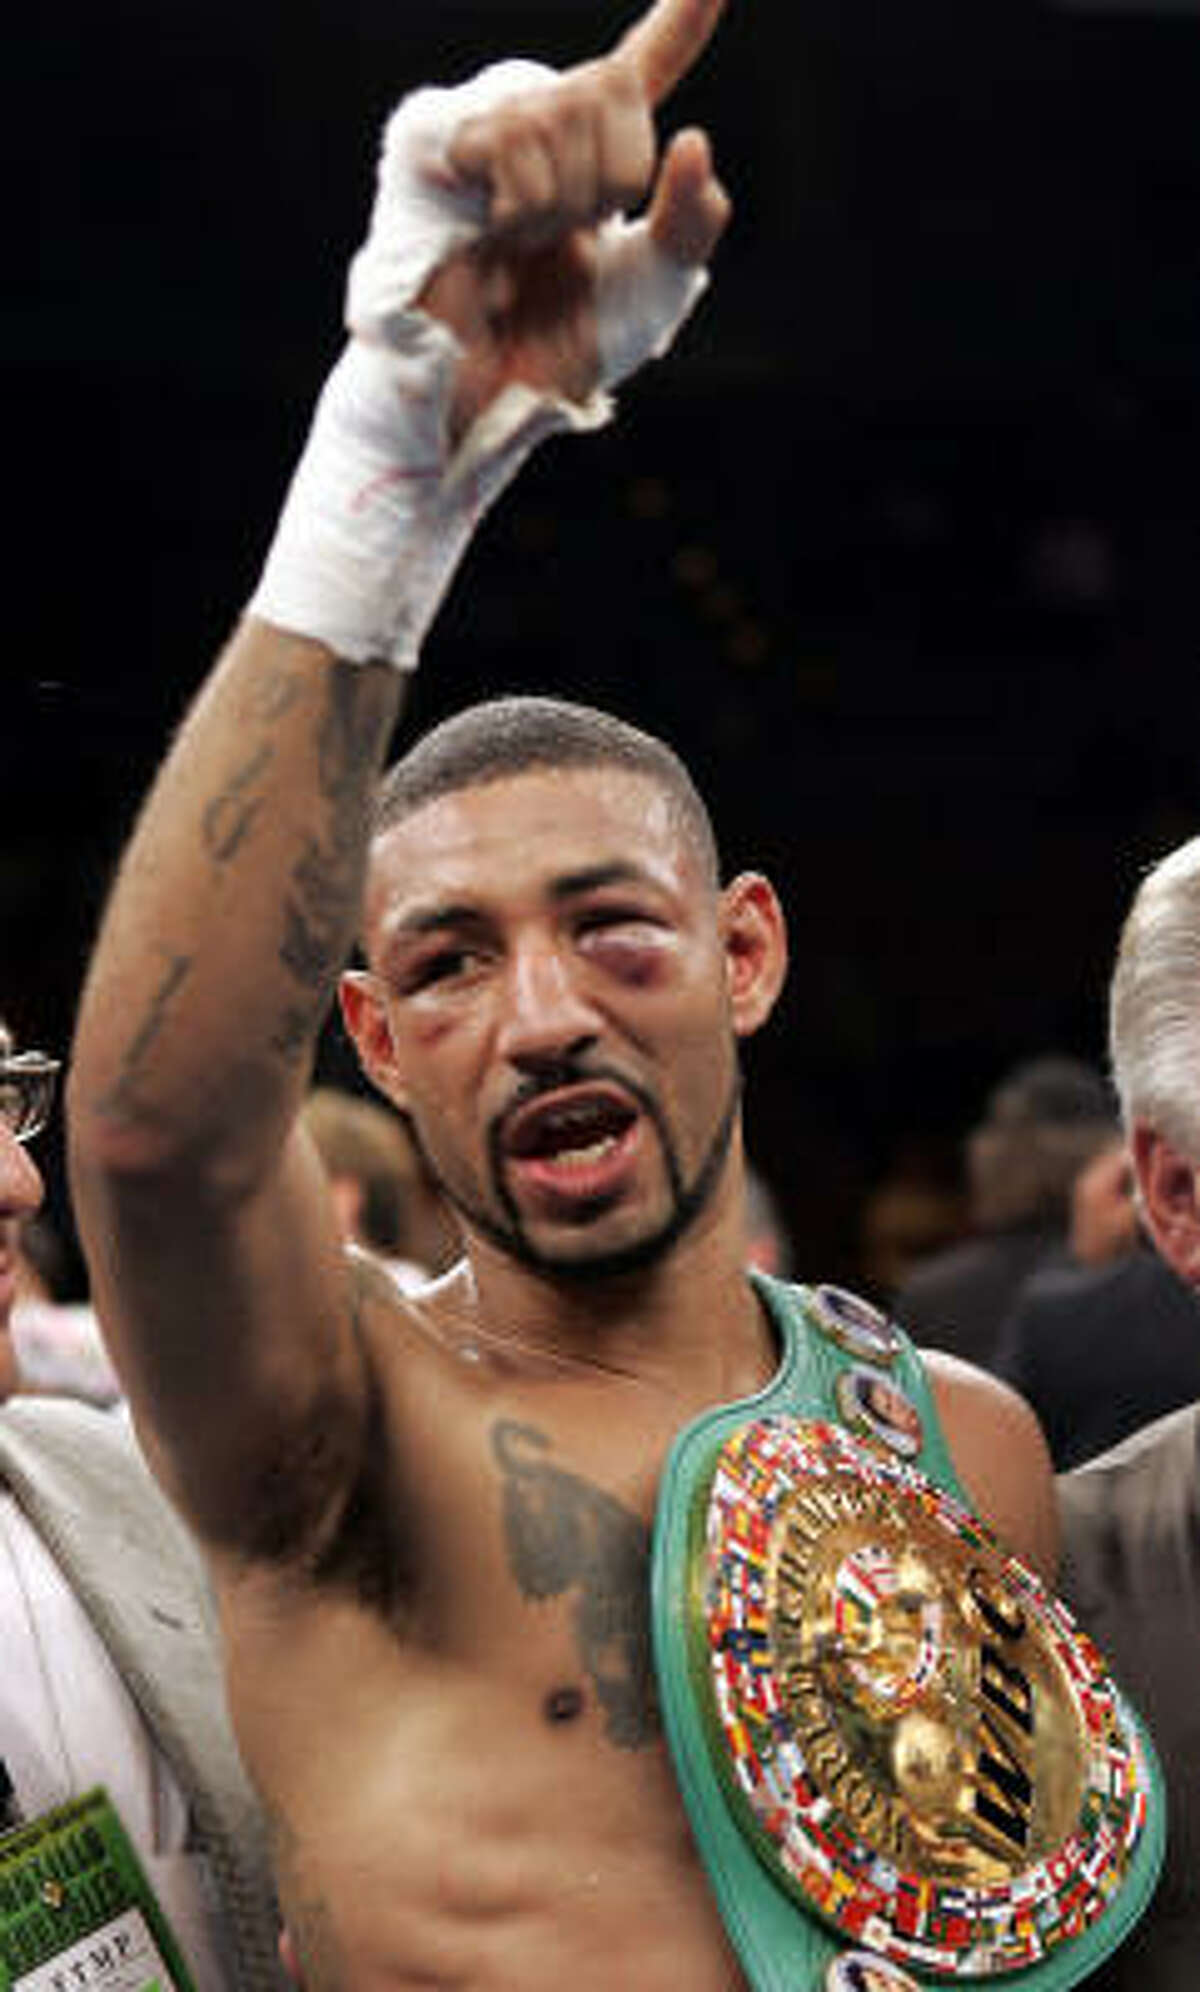 Diego Corrales won titles in two weight divisions during his short career.